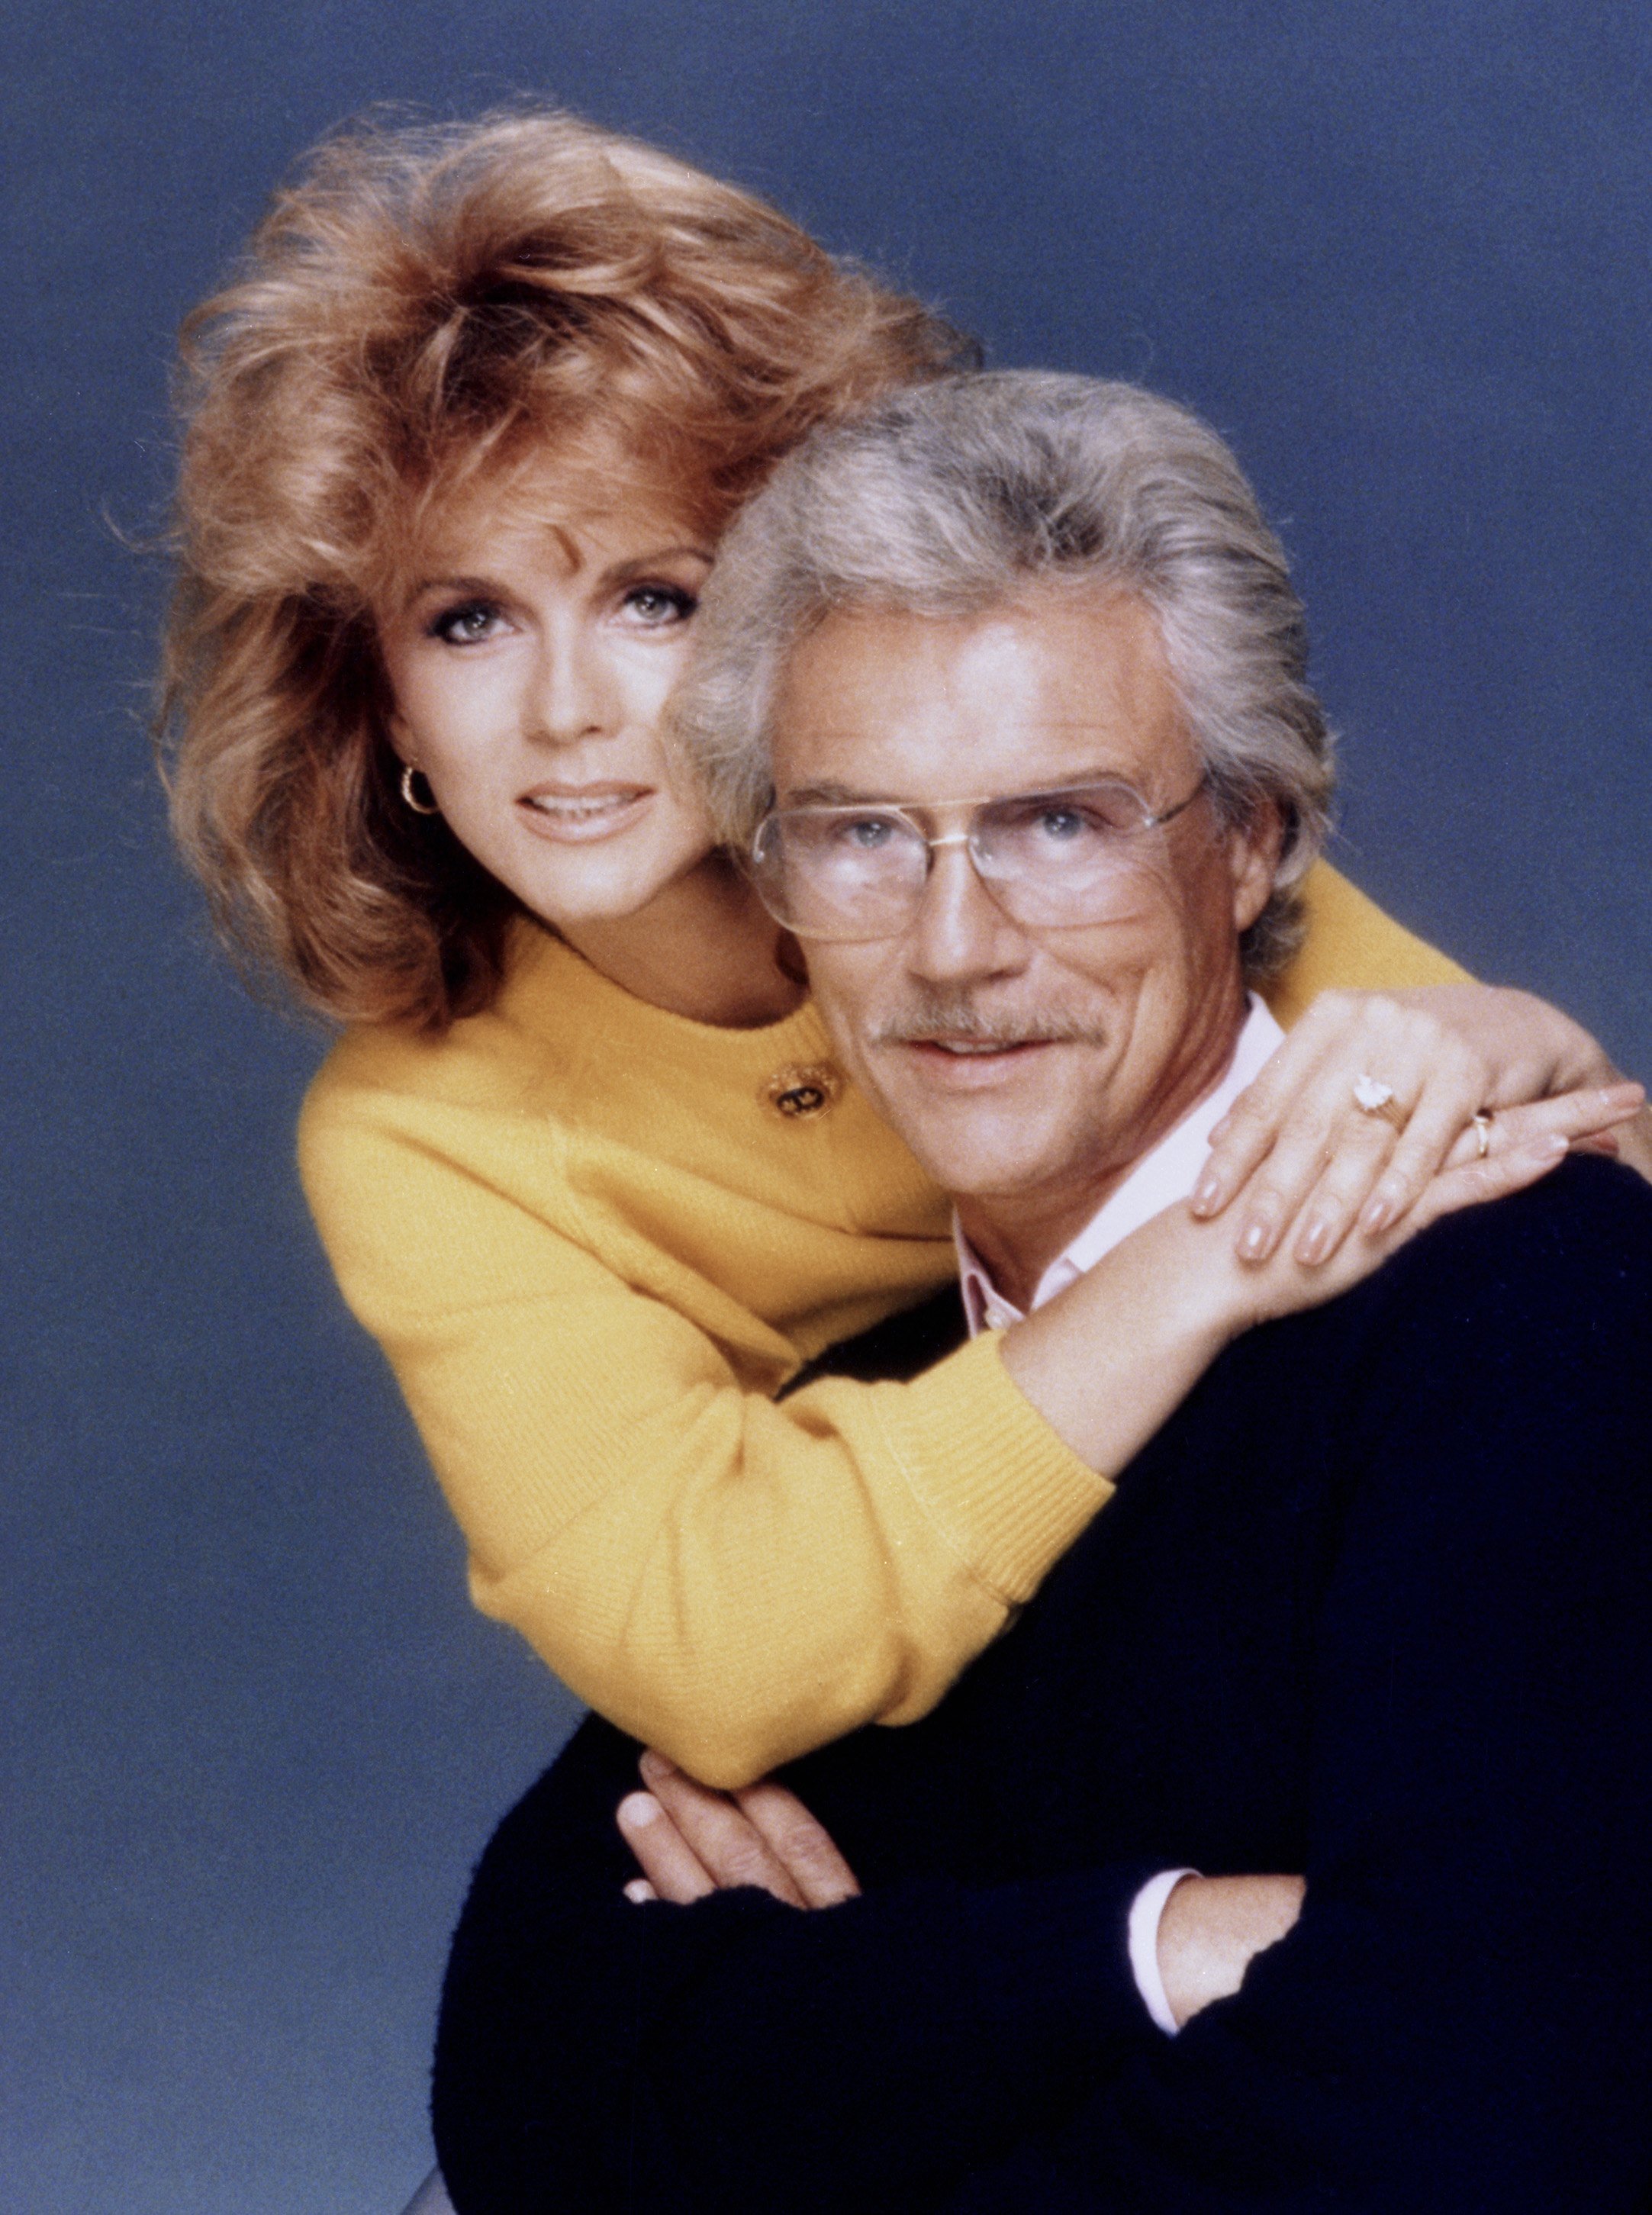 Ann-Margret and Roger smith pose for a portrait in 1985 in Los Angeles, California. | Source: Getty Images